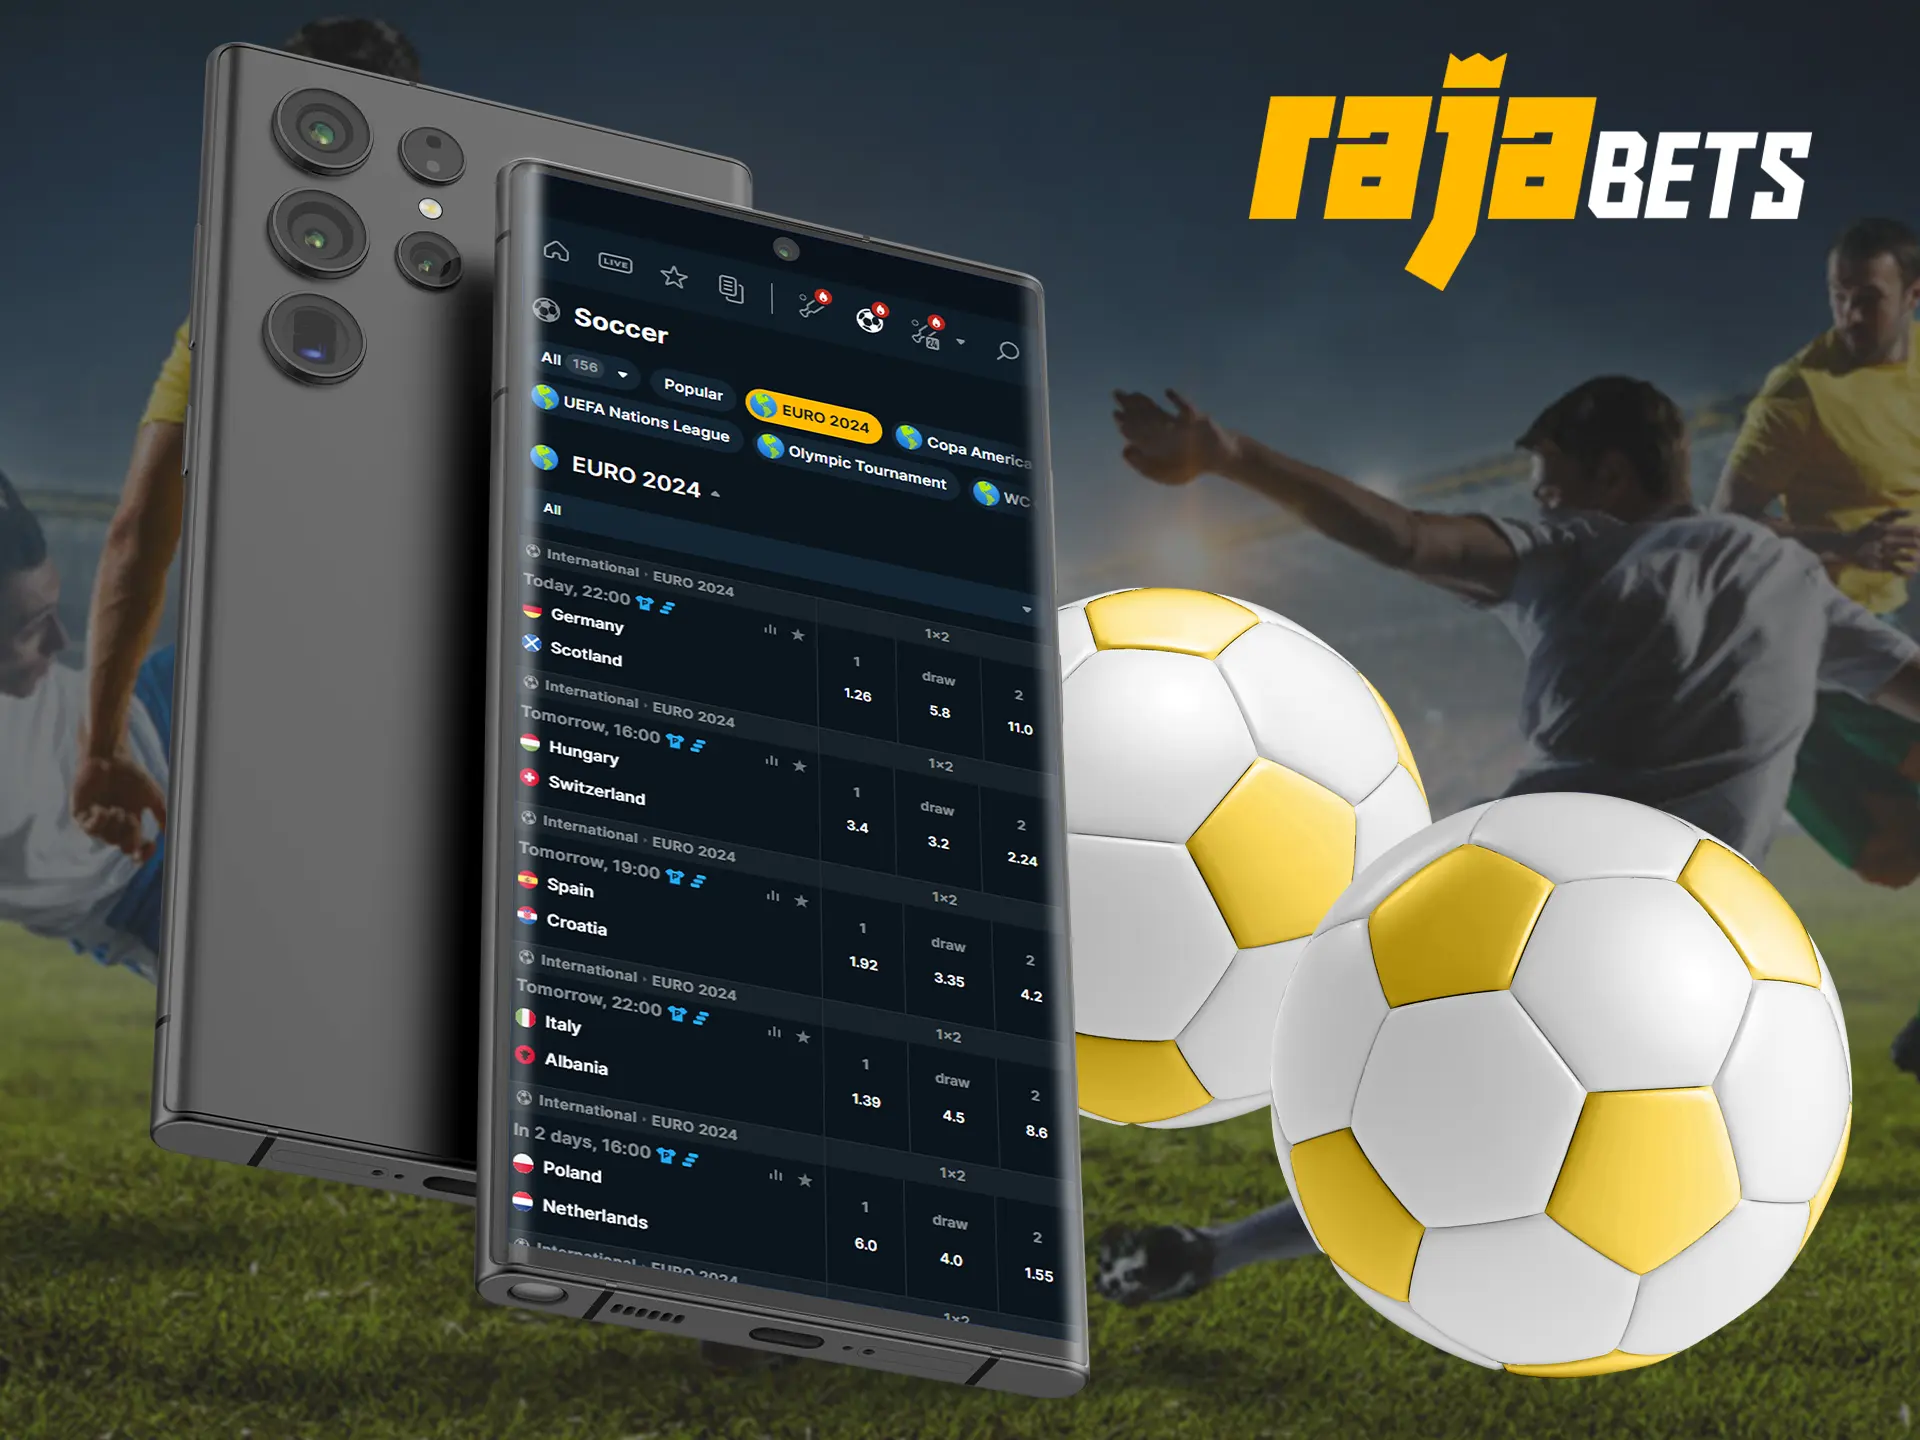 By downloading the Rajabets app on your phone you can bet on football even more conveniently.